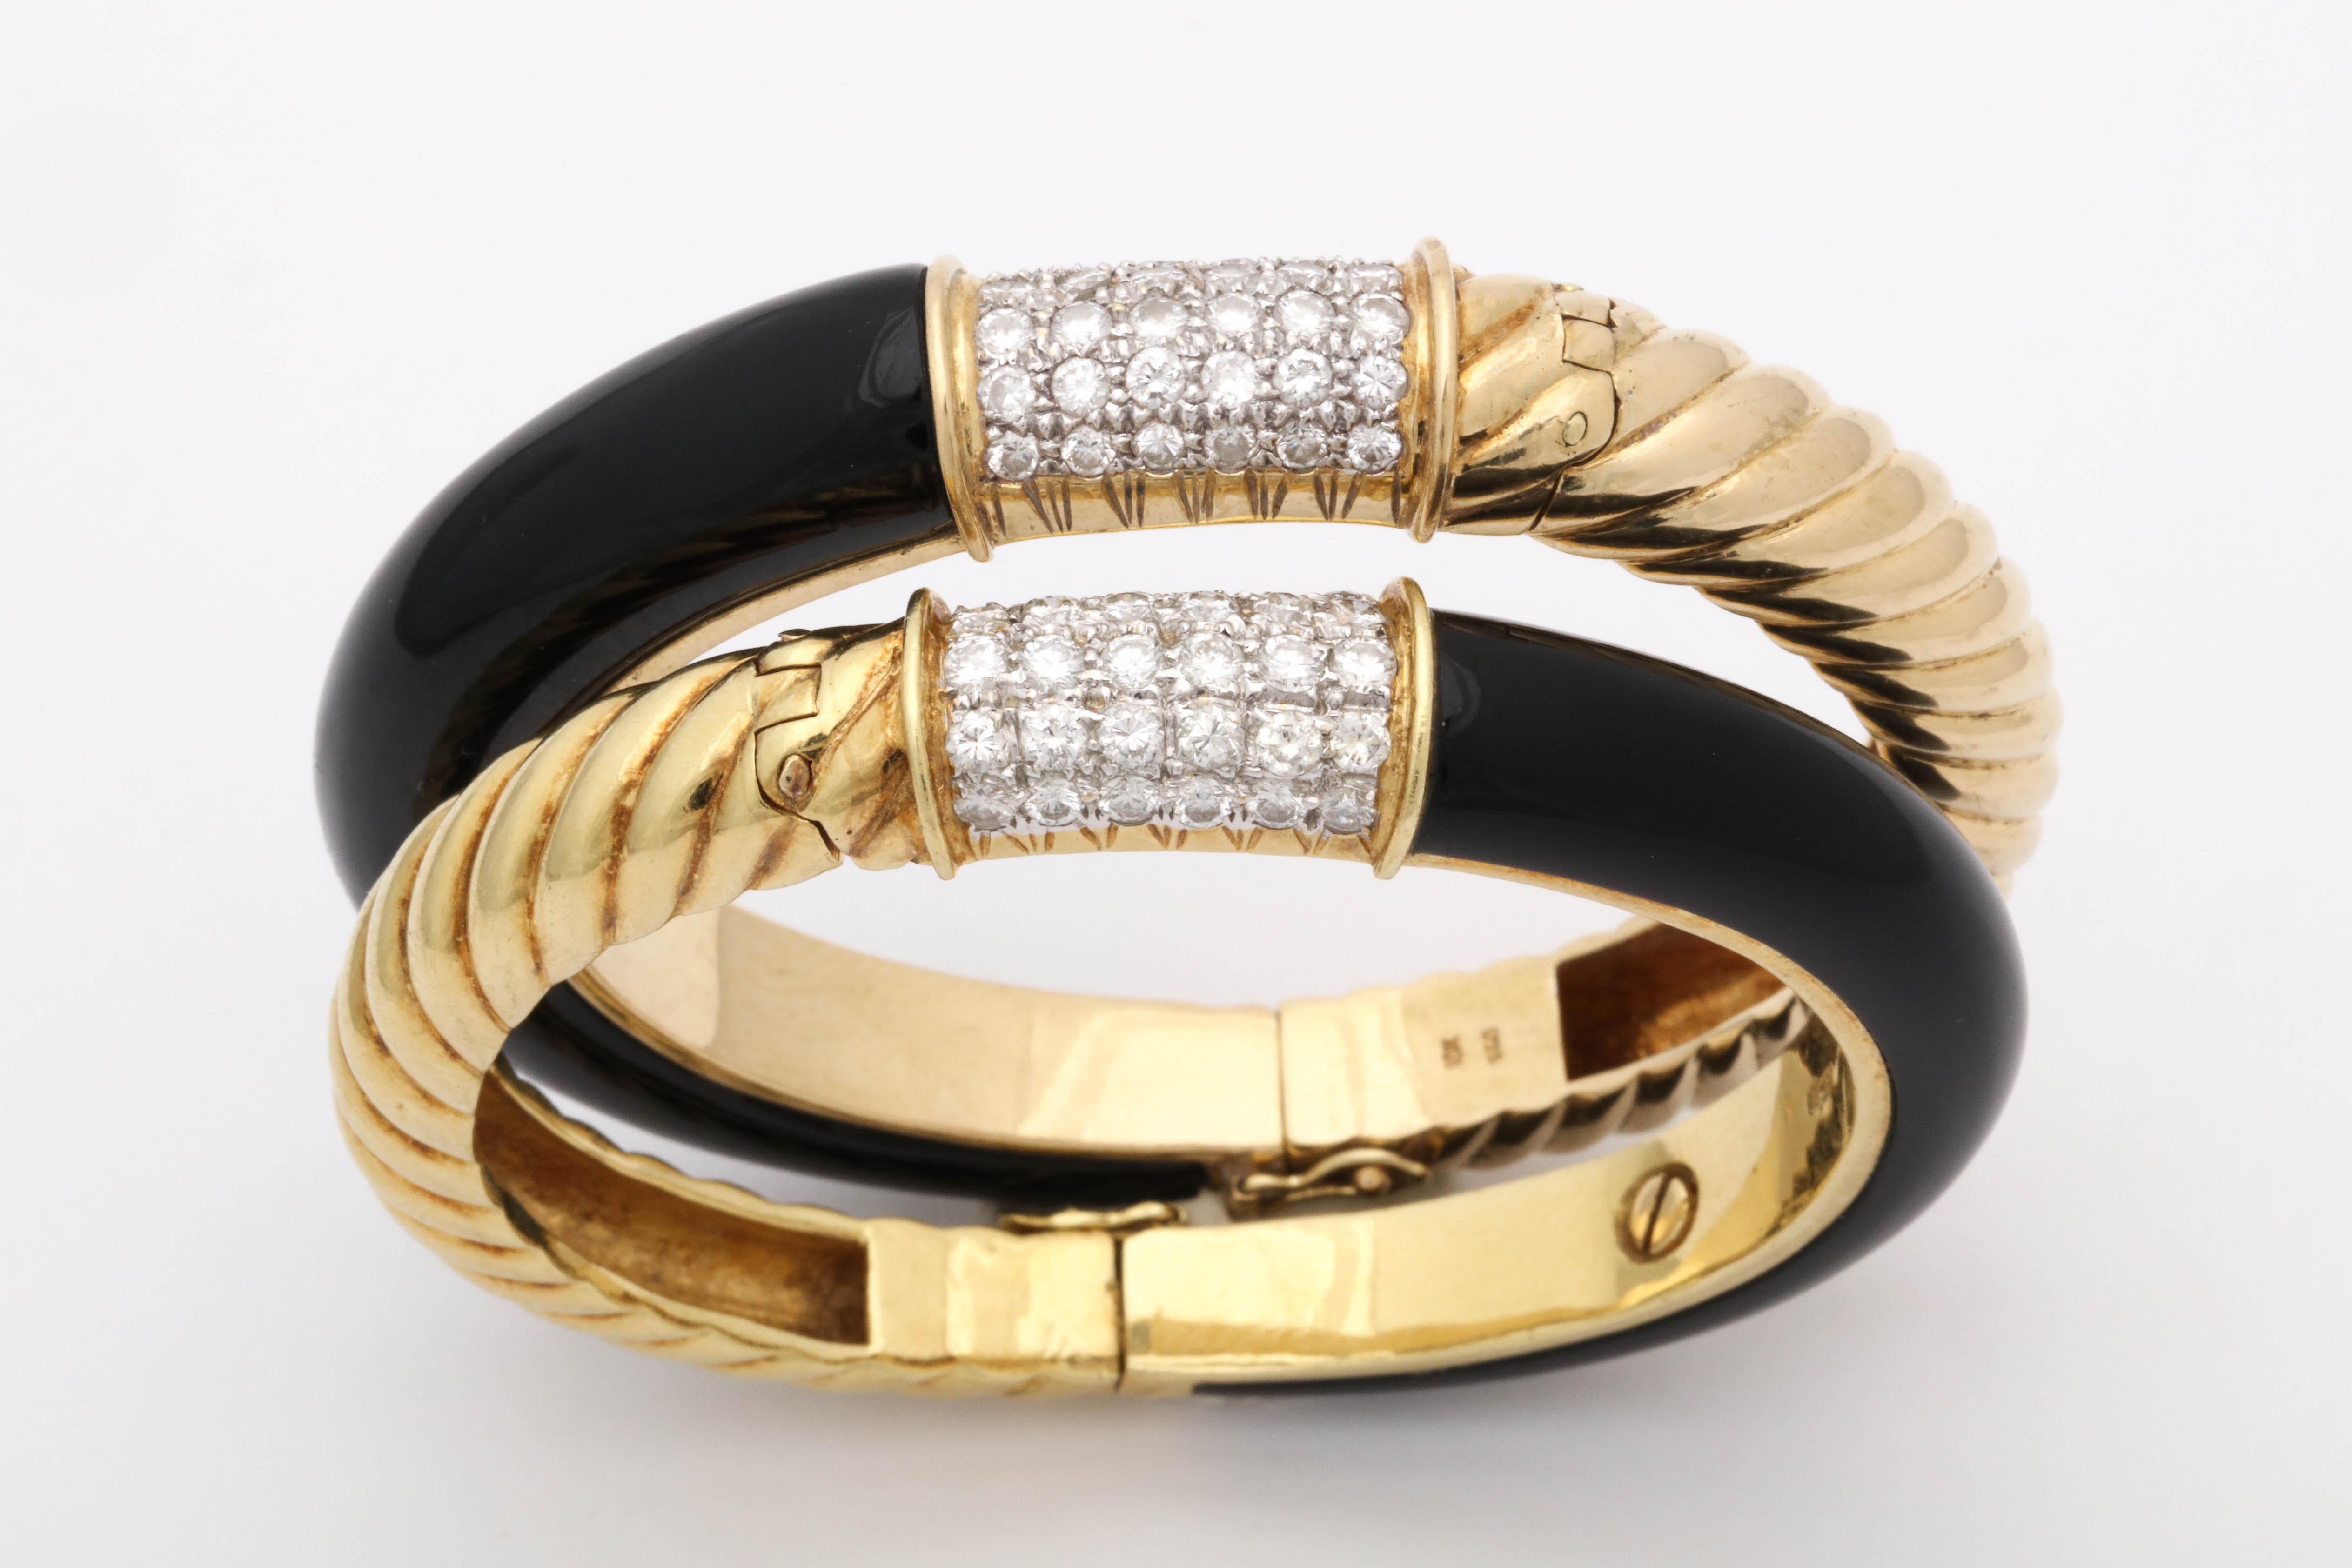 One Pair Of ladies 18kt High Polish Textured Ridged Gold Pair Of Bangles. Bangles Are Designed With Custom Cut Shiny PBlack Onyes On One Side And Designed With Ridged gold Pattern Design On The Other Side. Embellished with Two Diamond Center Rows